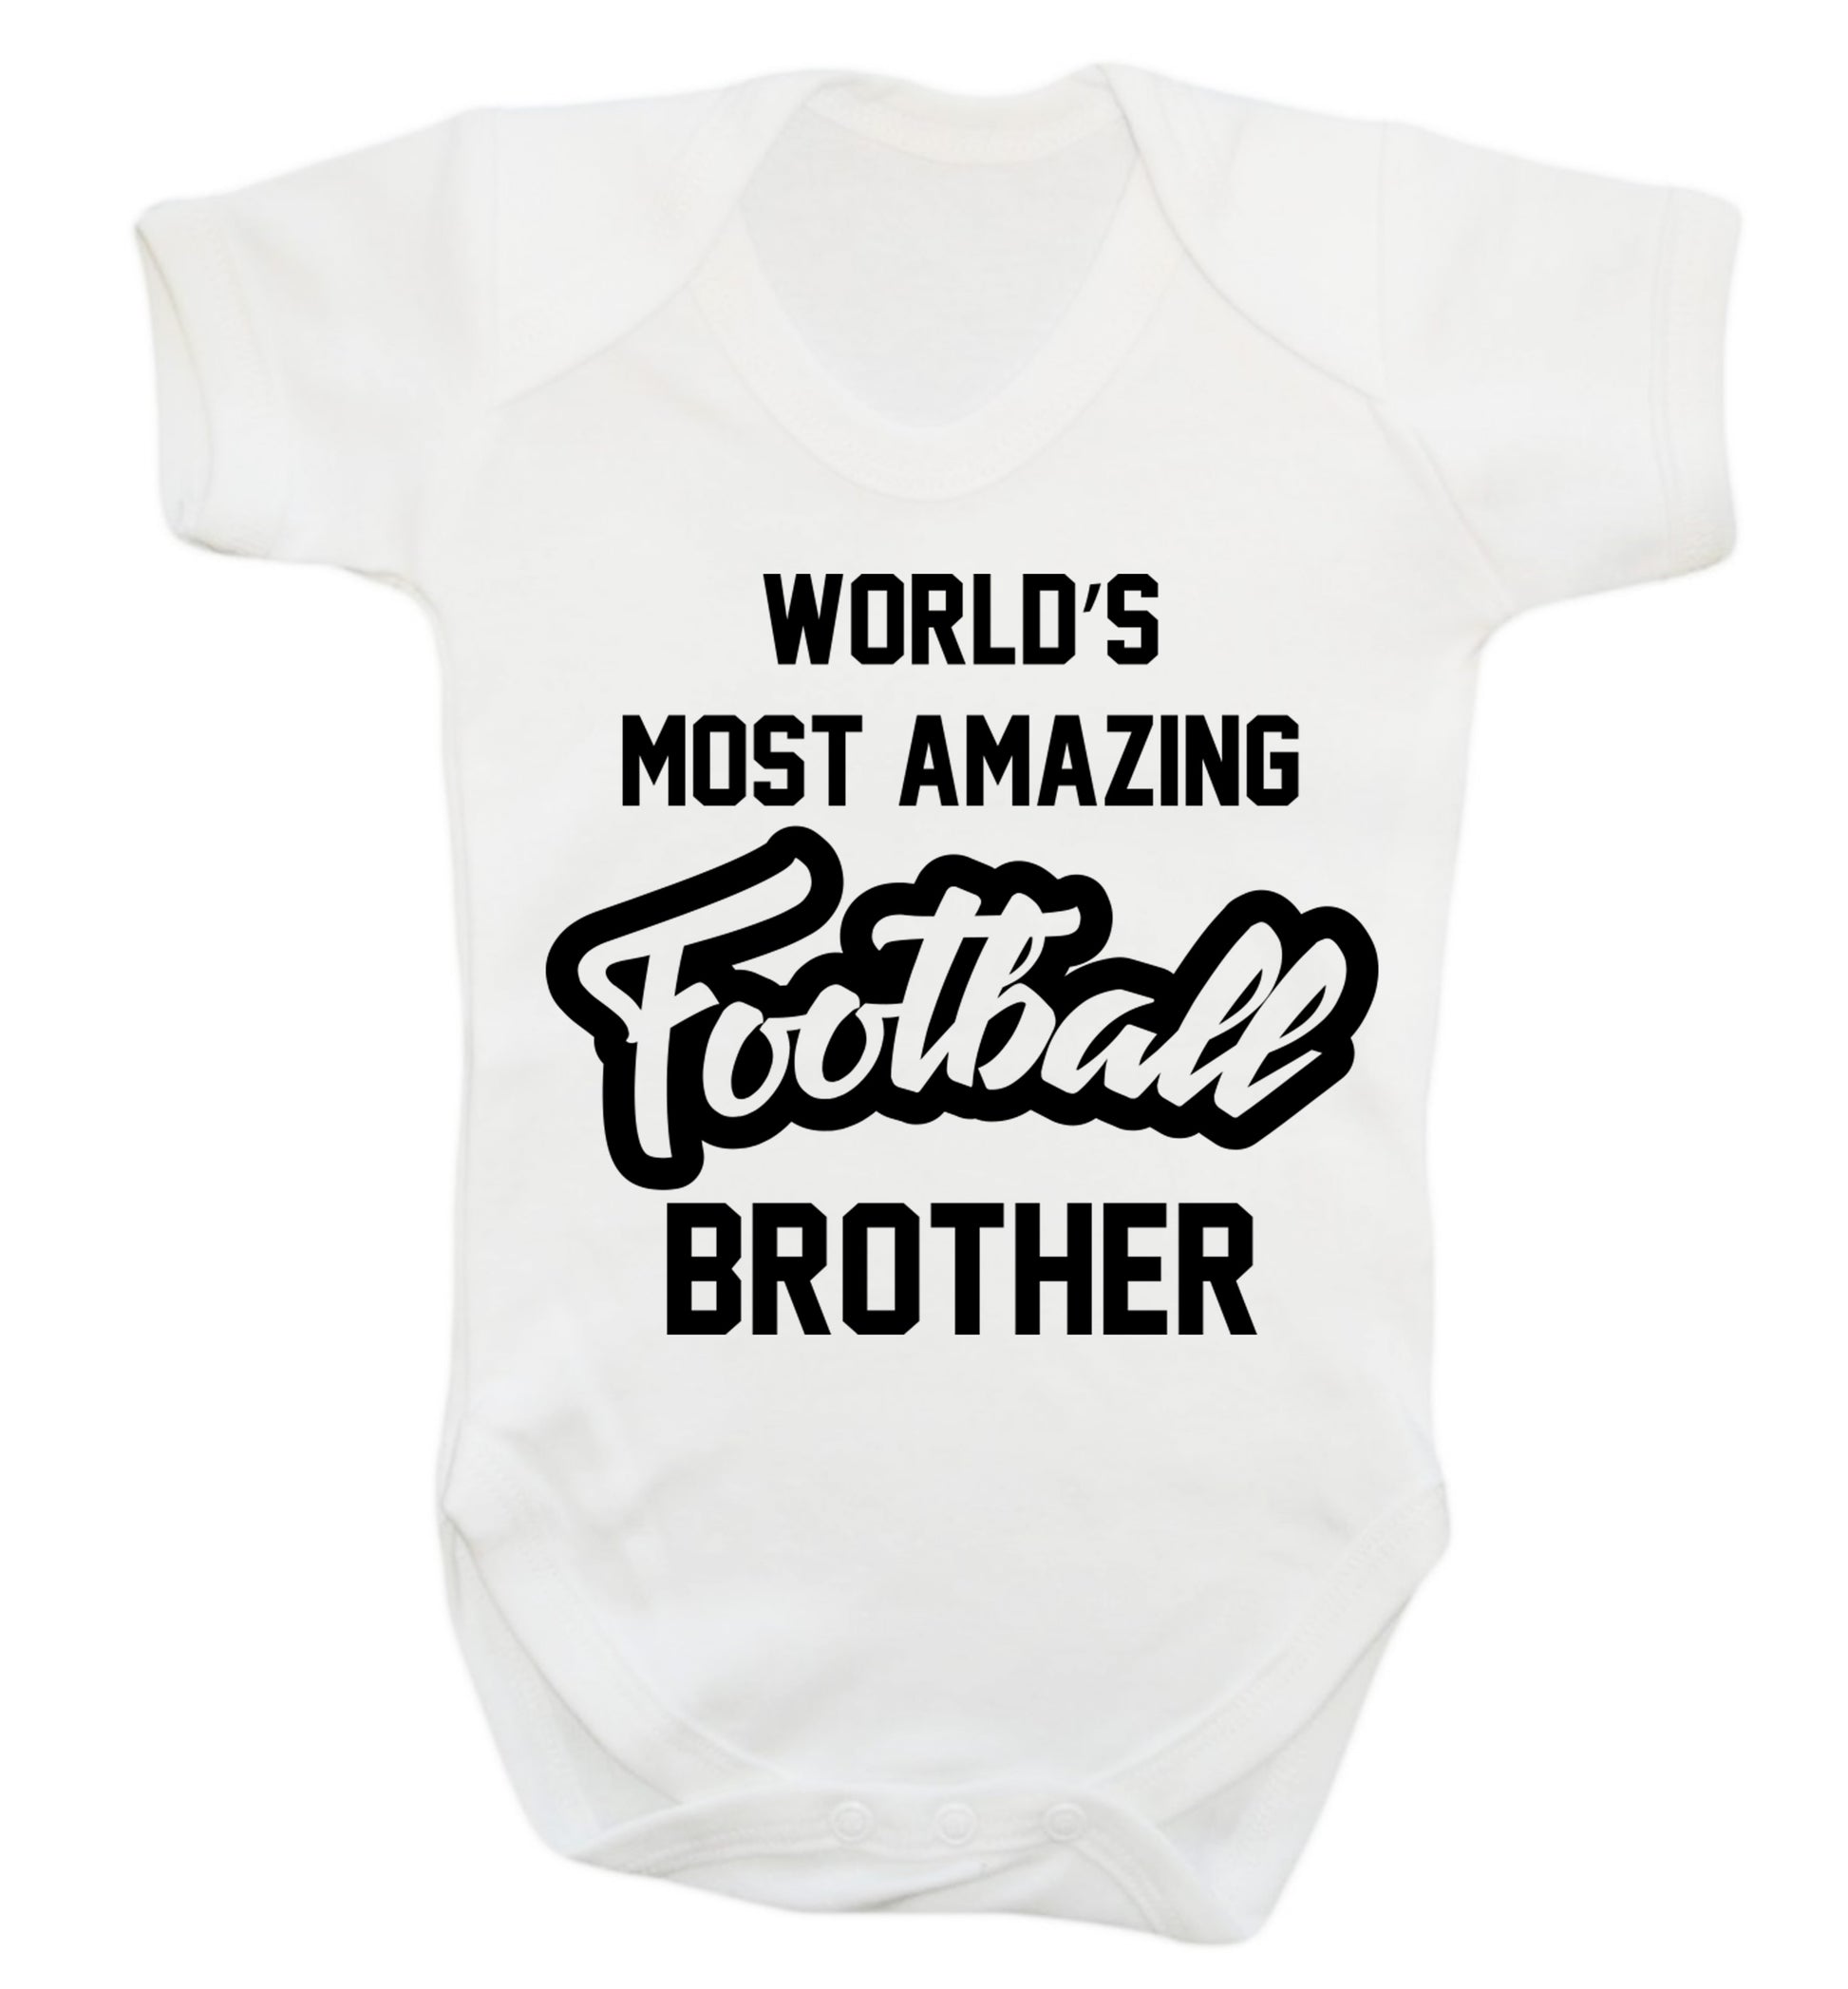 Worlds most amazing football brother Baby Vest white 18-24 months